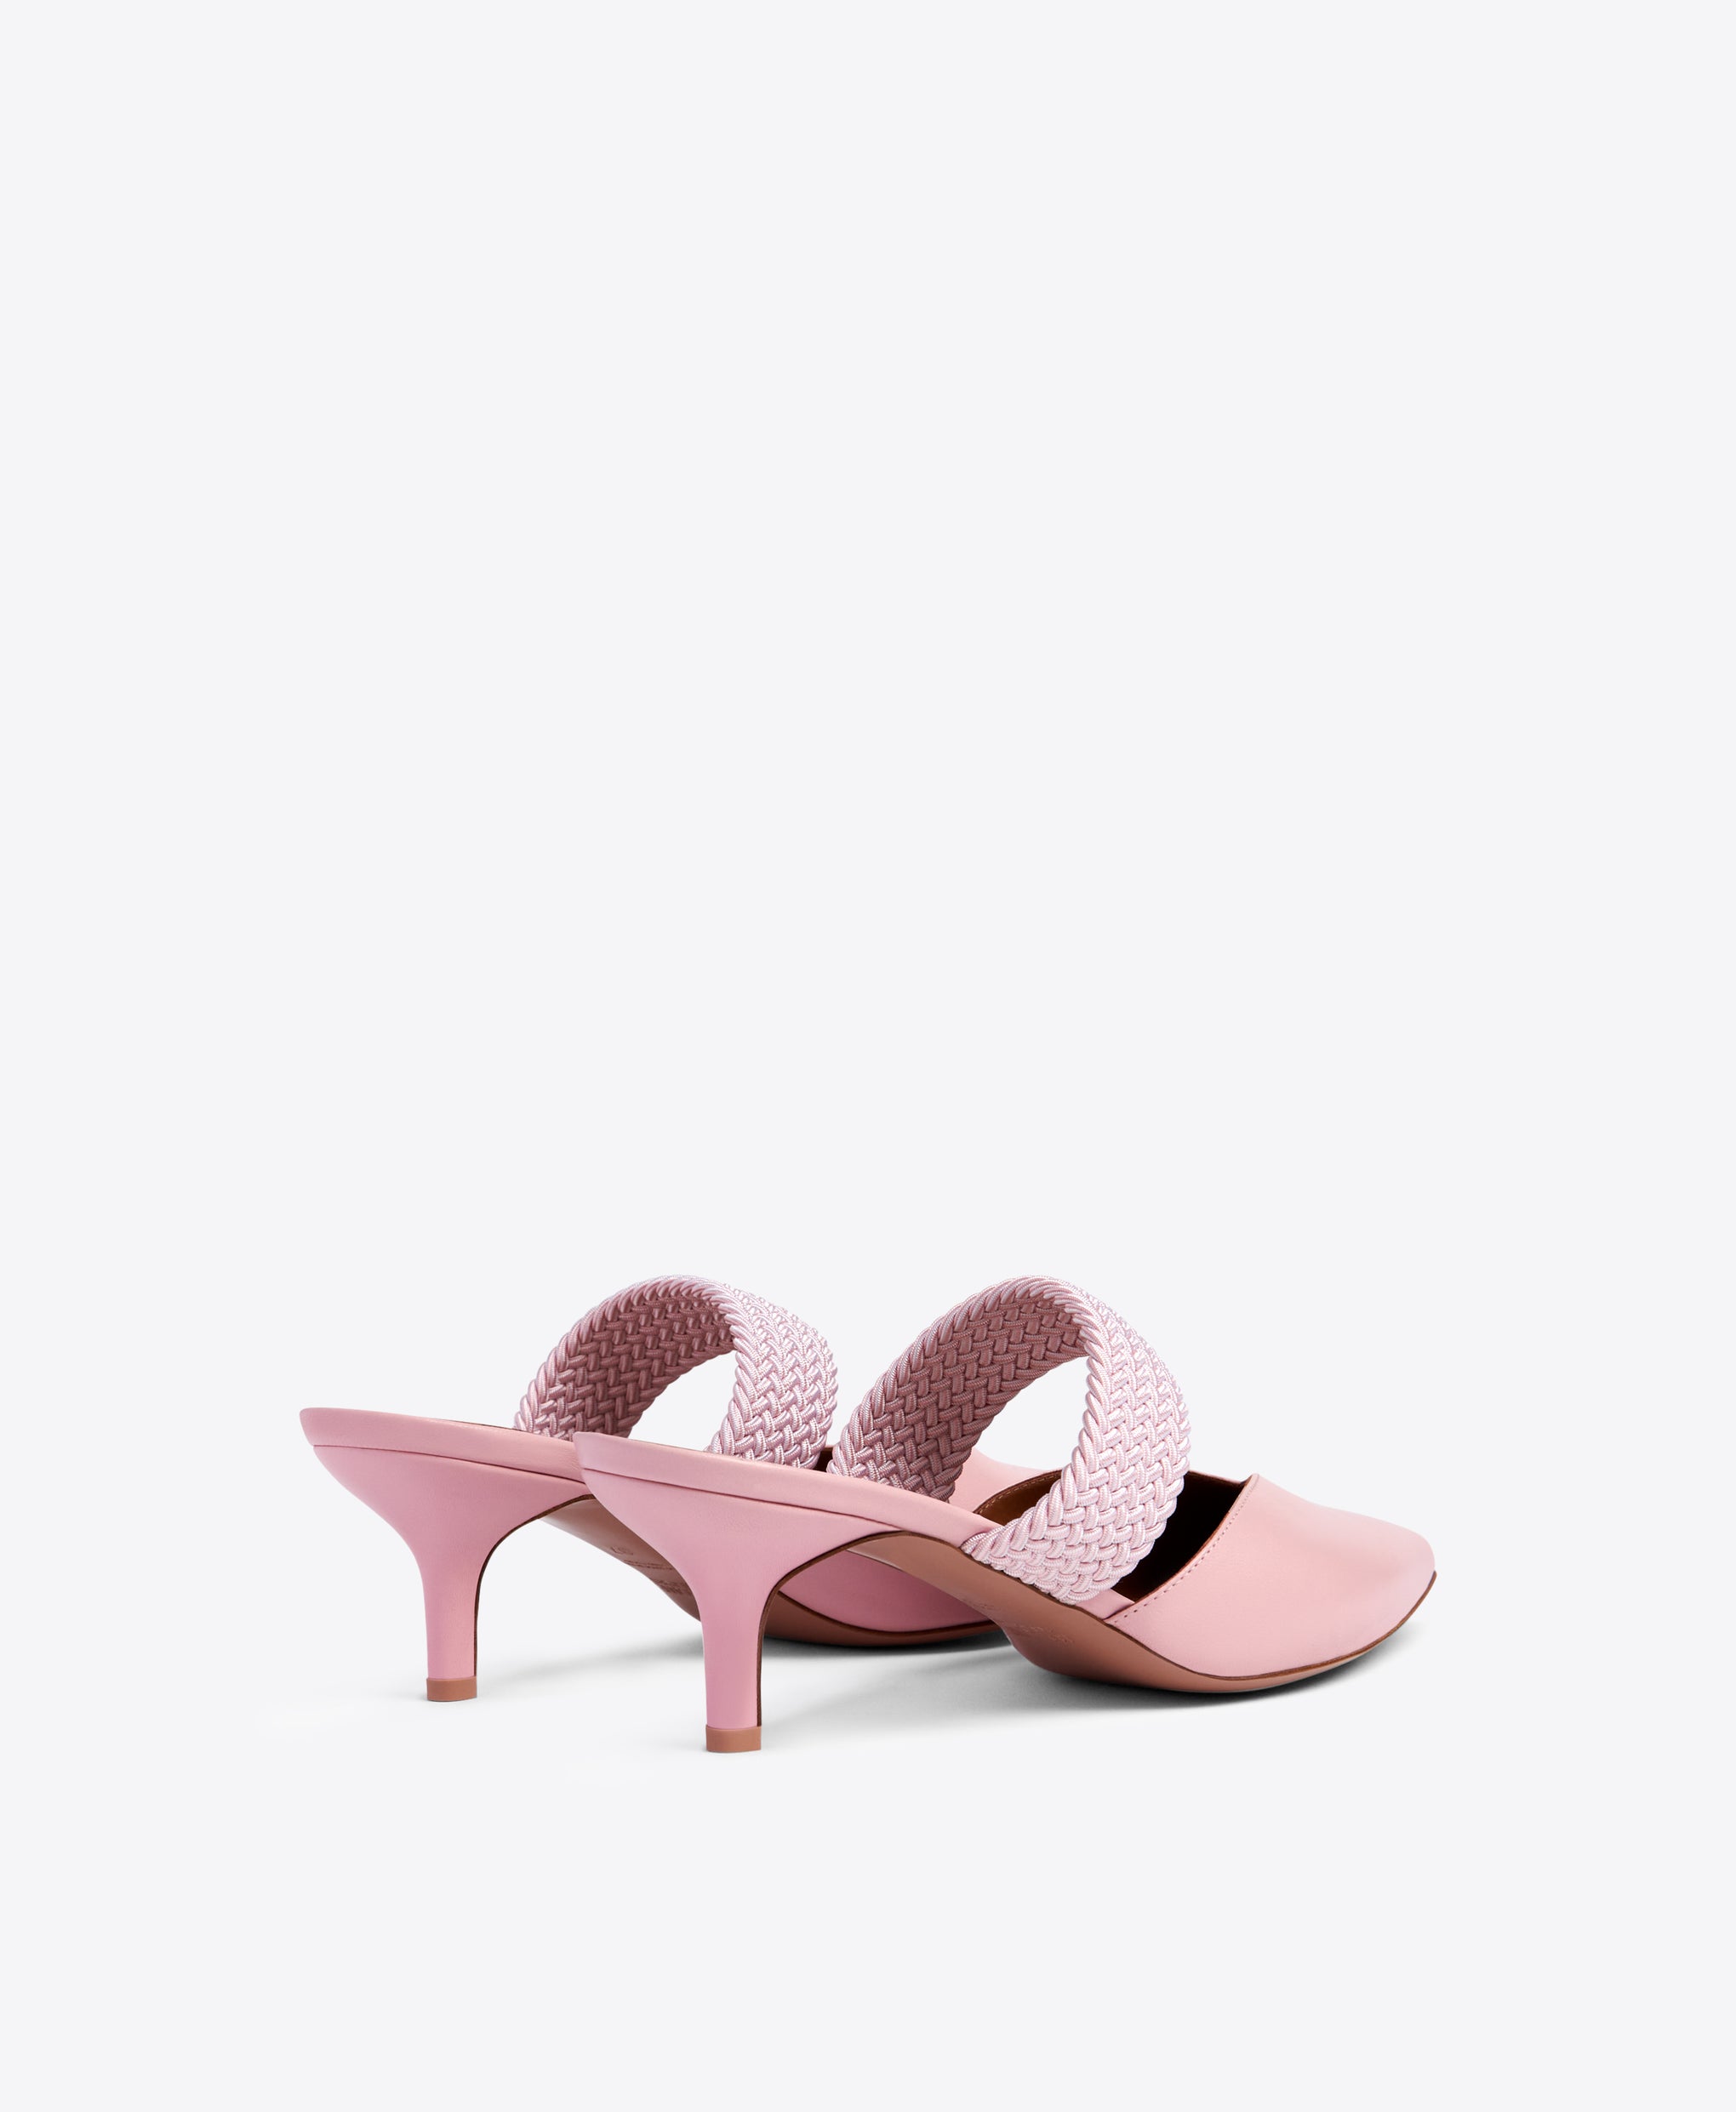 Malone Souliers Maisie 45mm Light Pink Leather Kitten Heel Mules